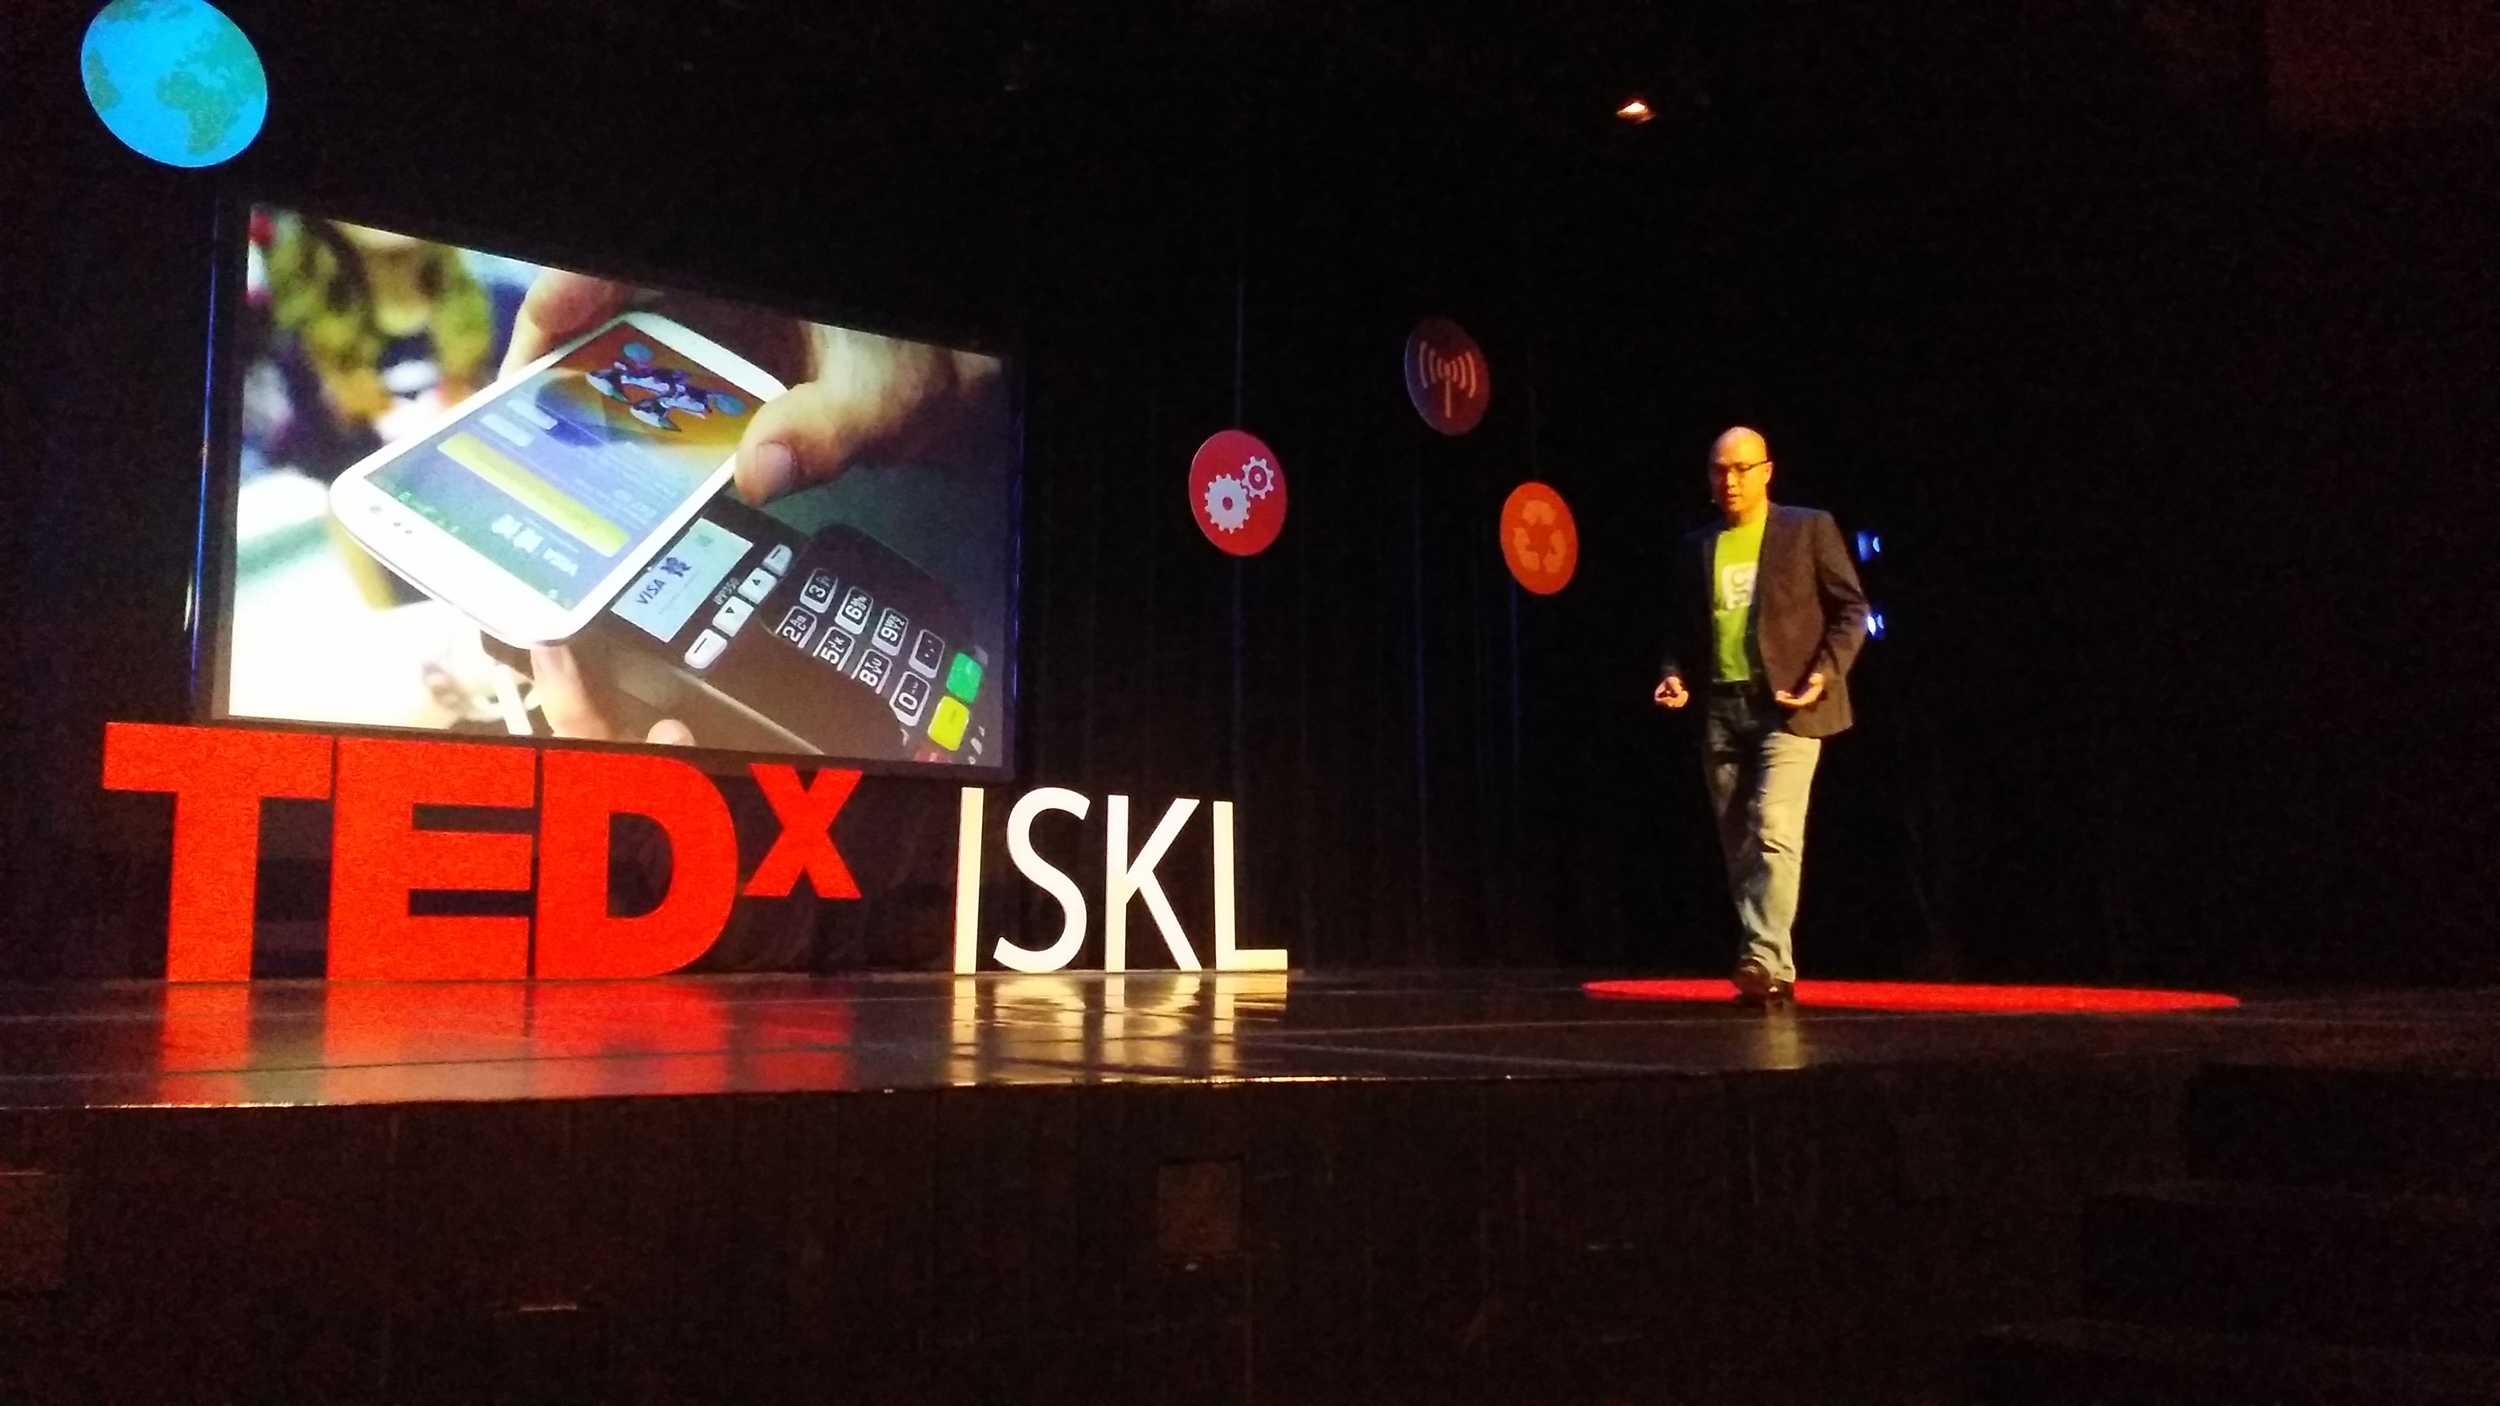 TEDxISKL-2016-Stanley-Chee-The-Not-So-Distant-Future-of-Digital-Marketing.jpg